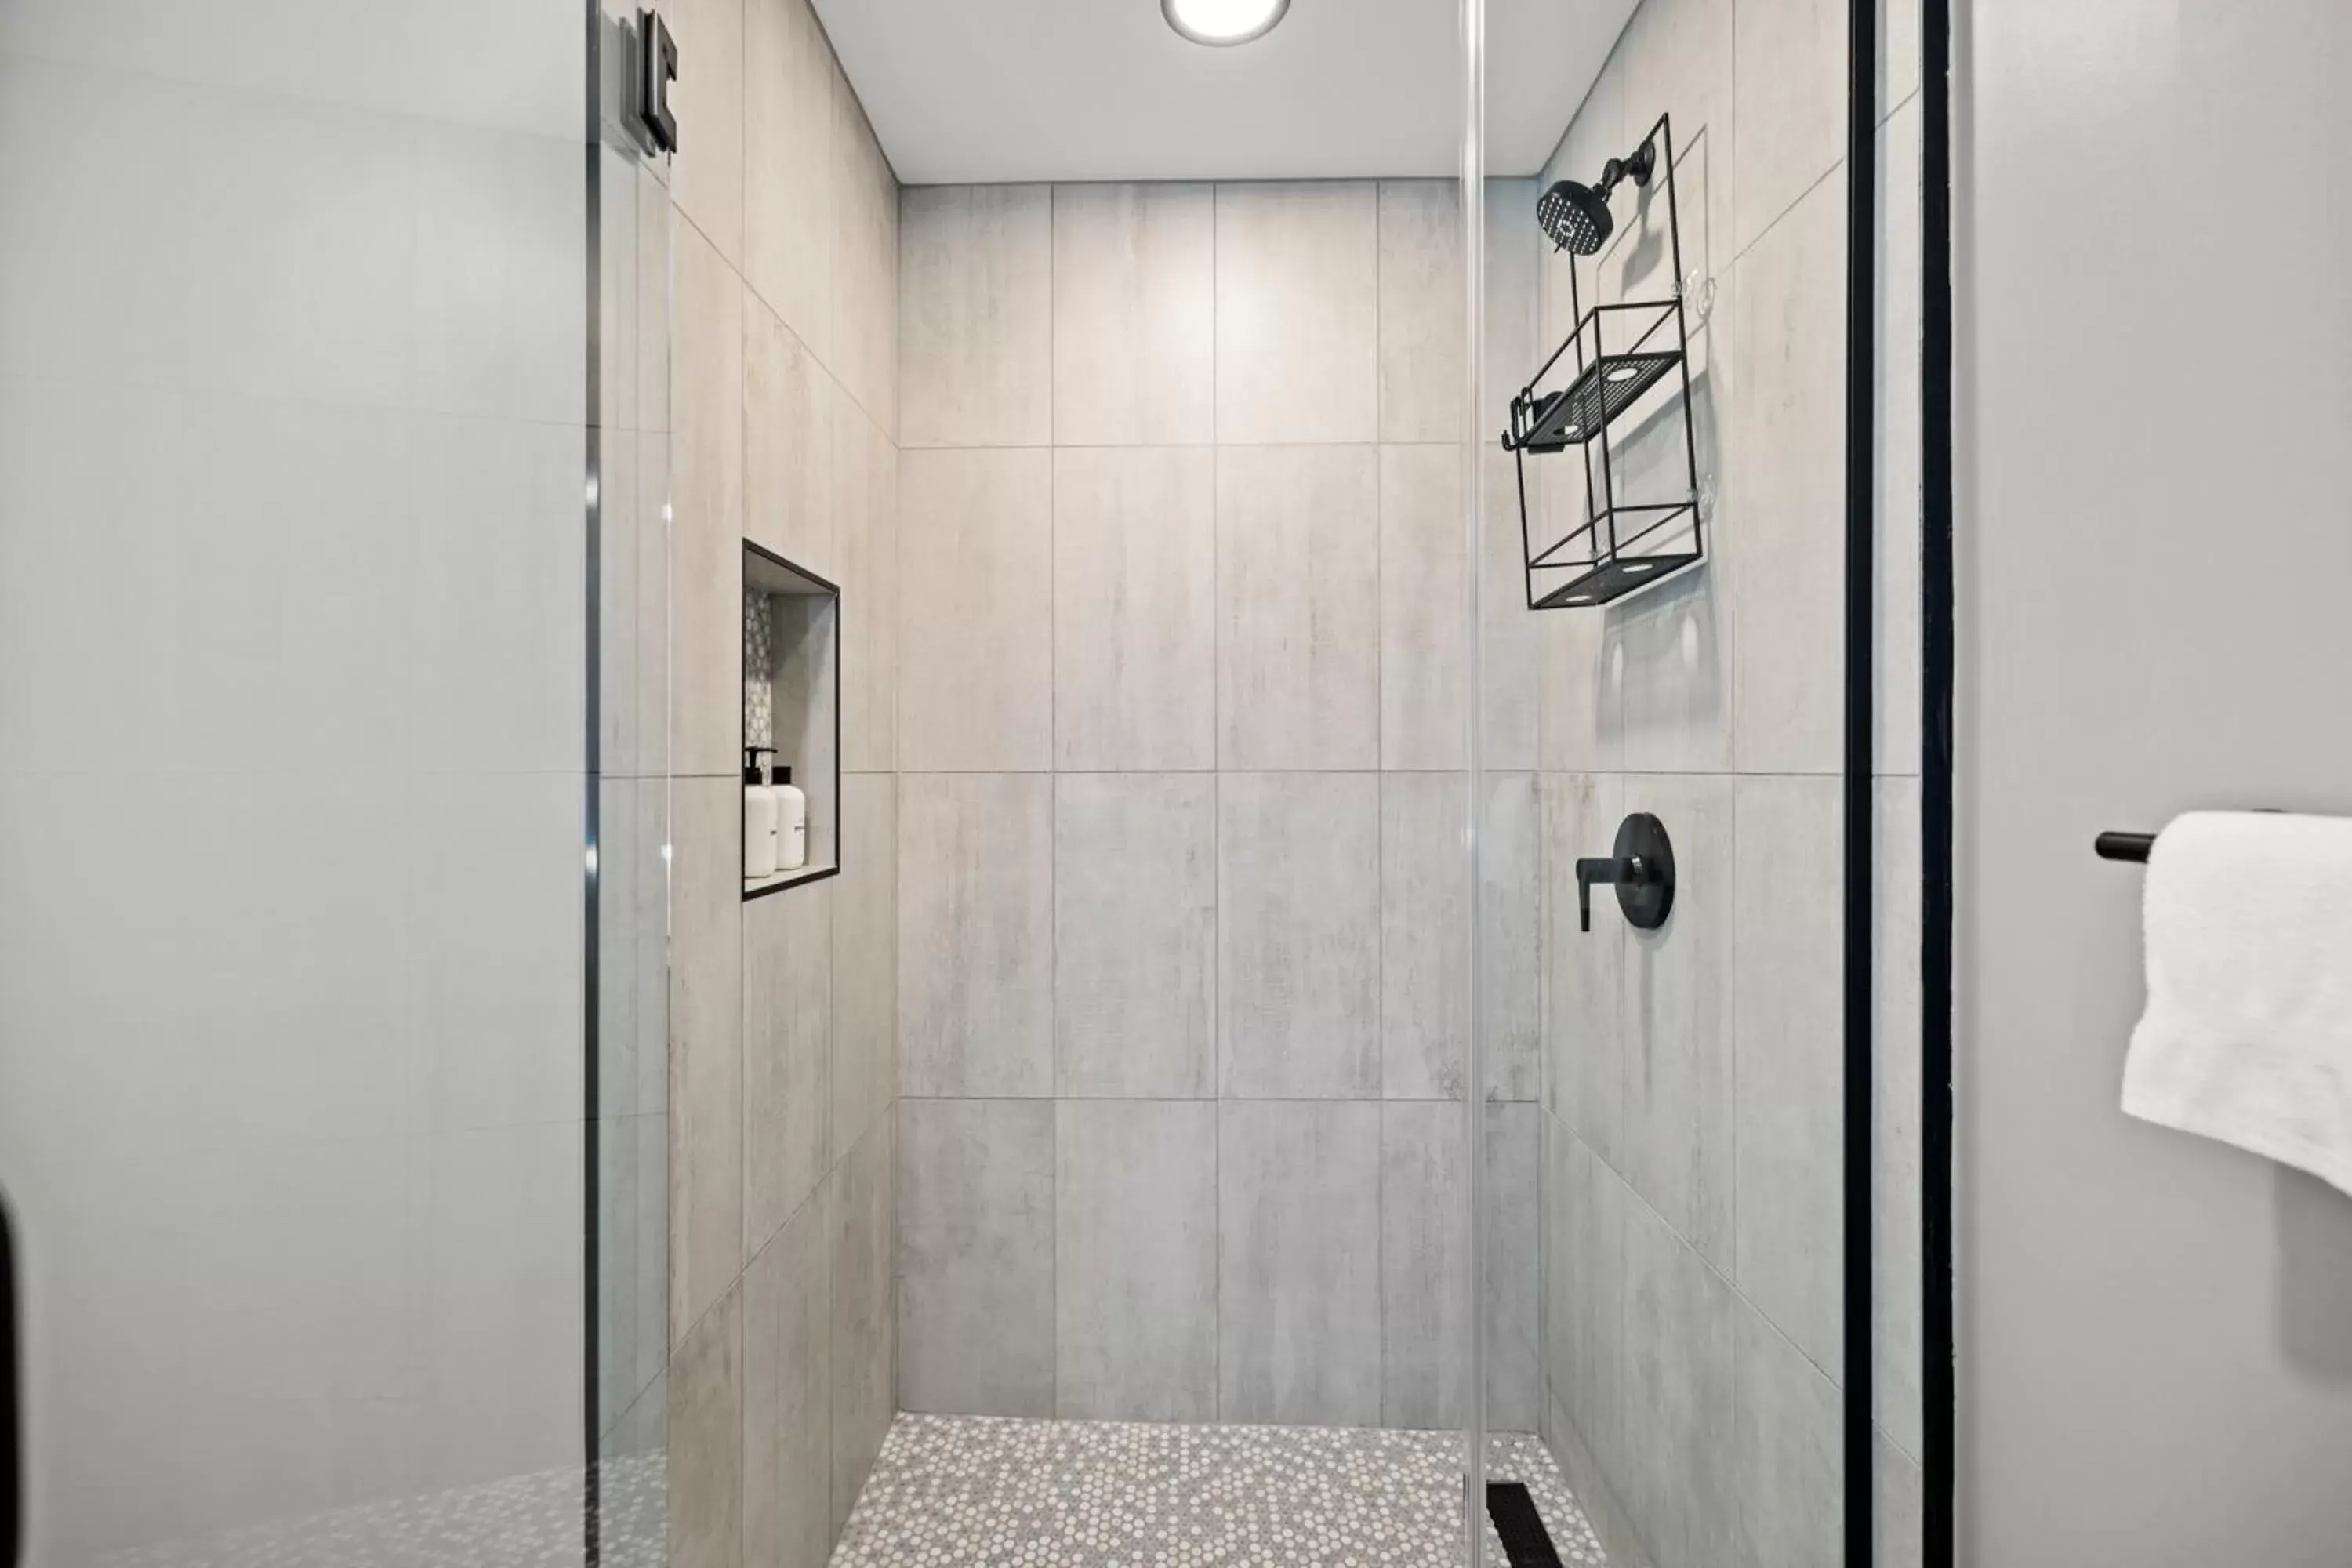 Shower, Bathroom in Coda on Half, a Placemakr Experience